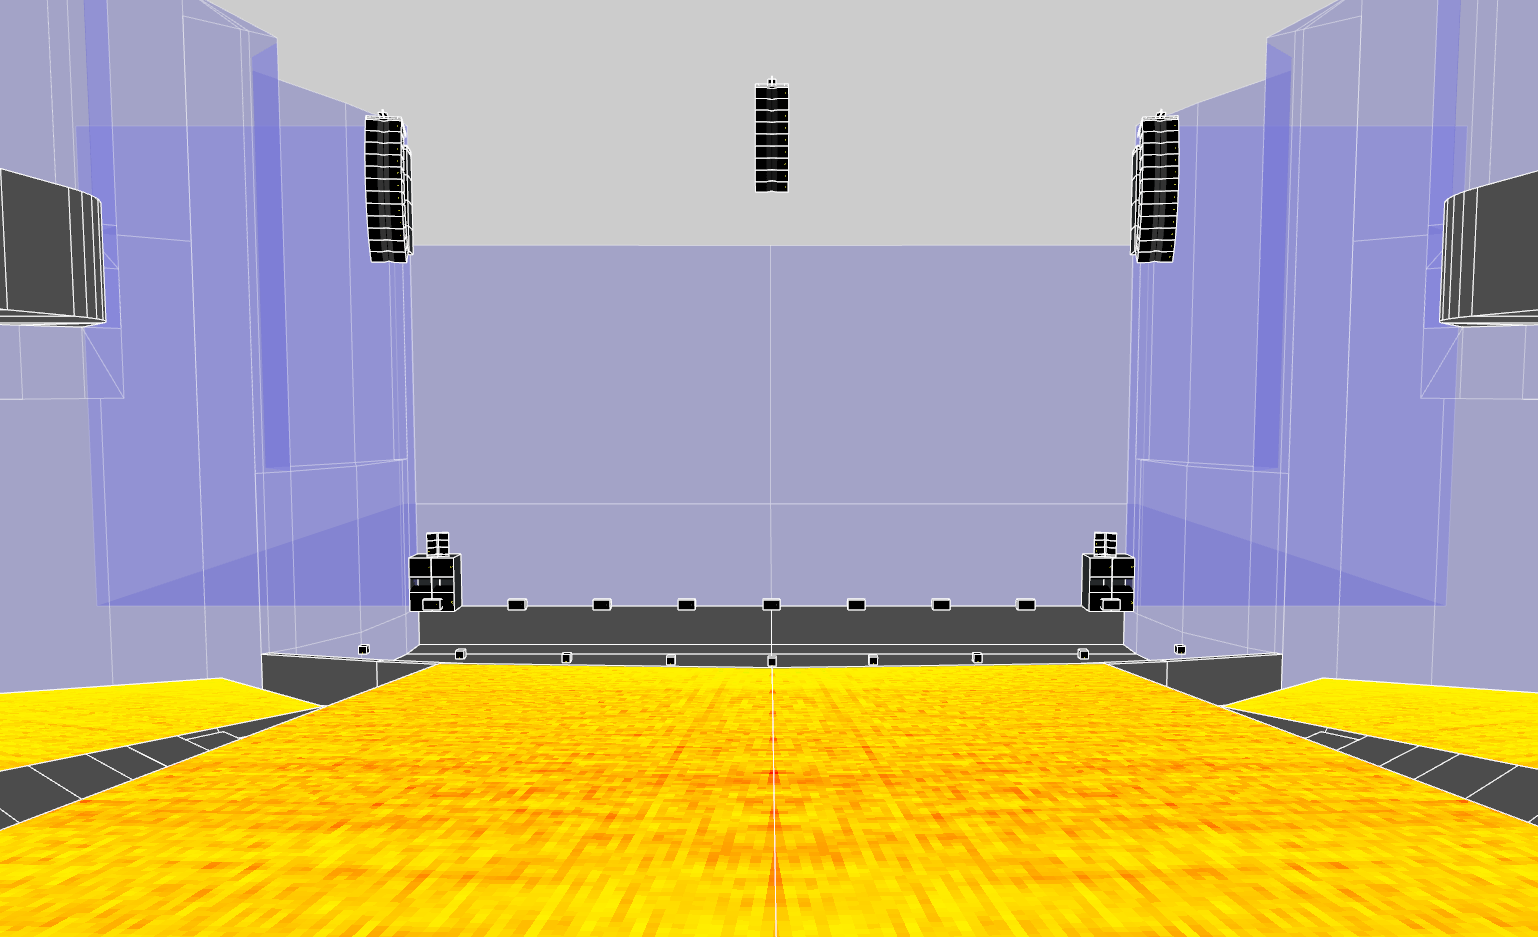 3D Model of sound system set up by L-Acoustics at the Shaanxi Grand Theater, China